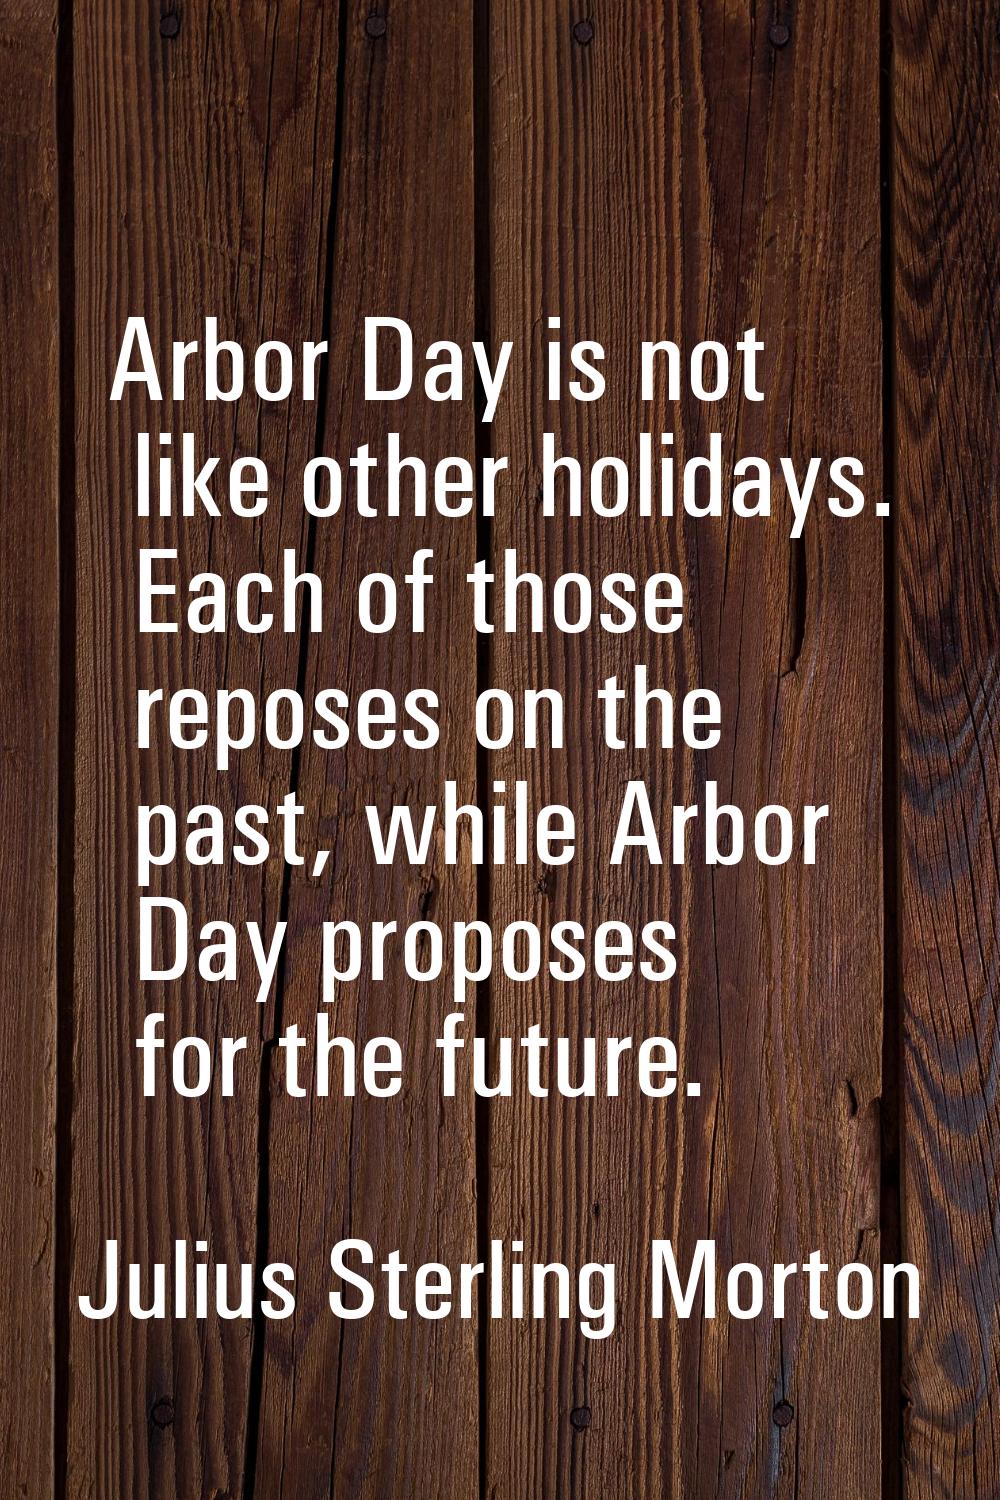 Arbor Day is not like other holidays. Each of those reposes on the past, while Arbor Day proposes f